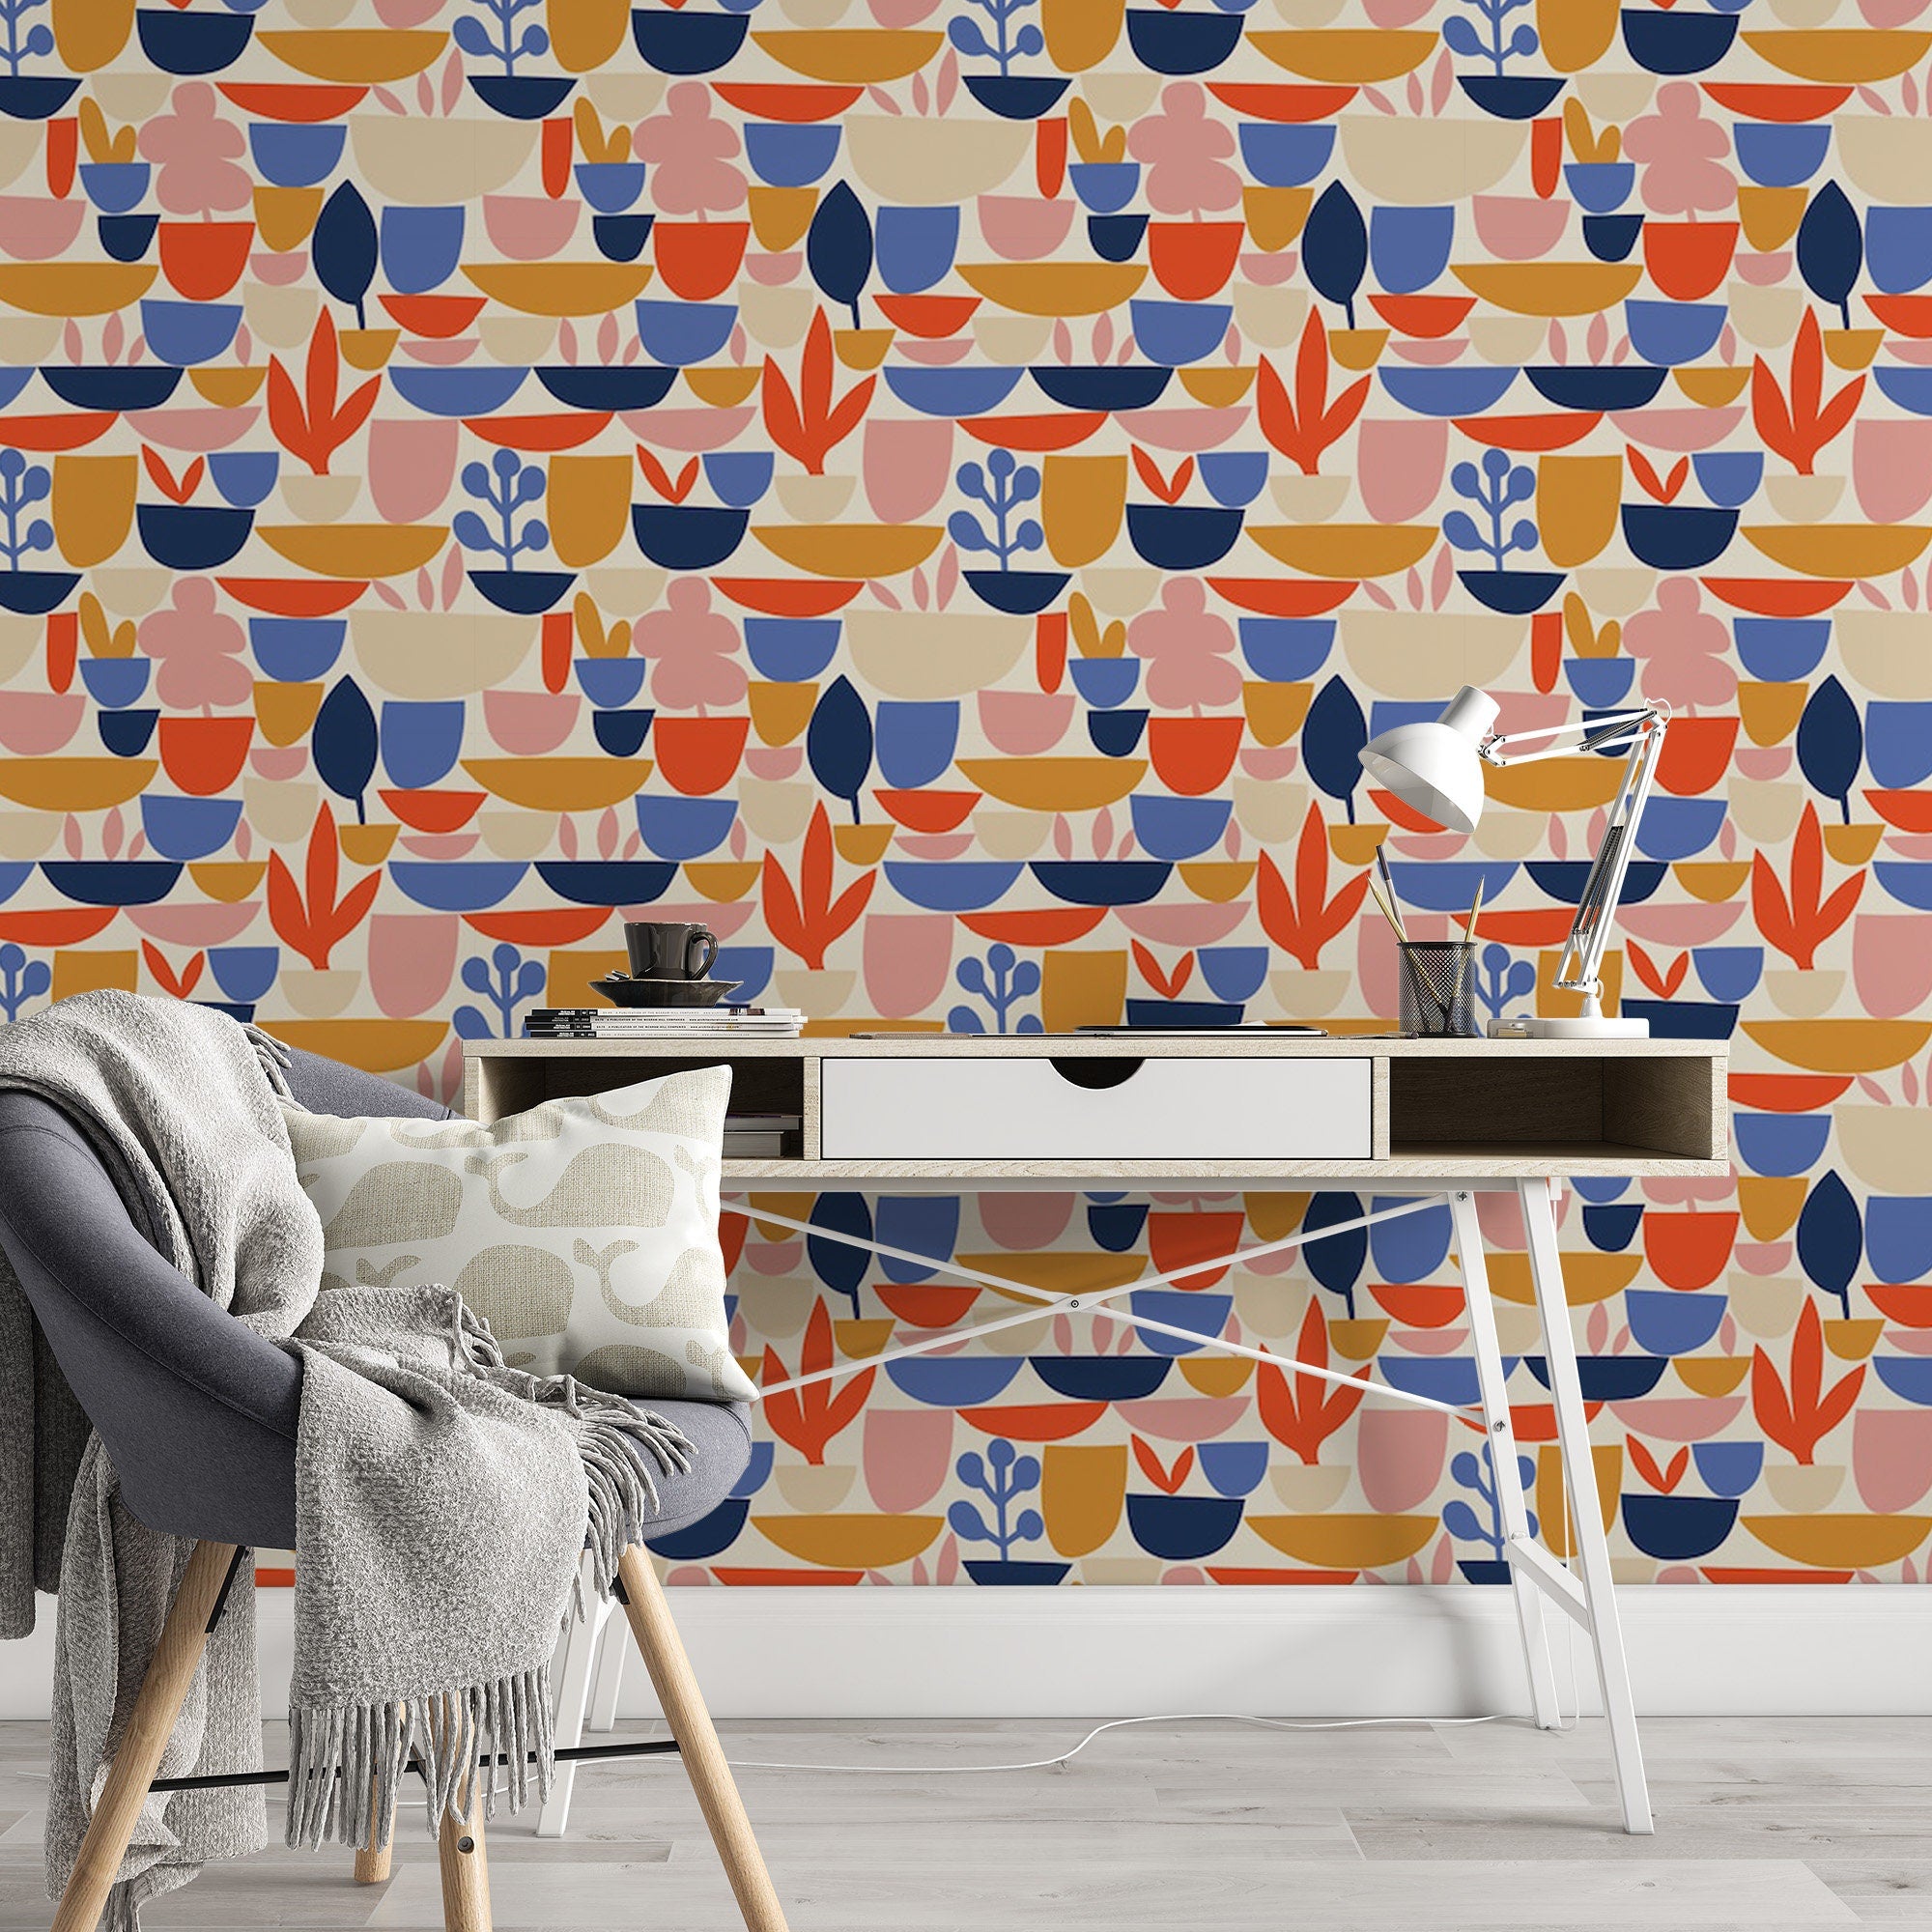 Buy Orange Floral Peel and Stick Wallpaper  70s Removable Online in India   Etsy